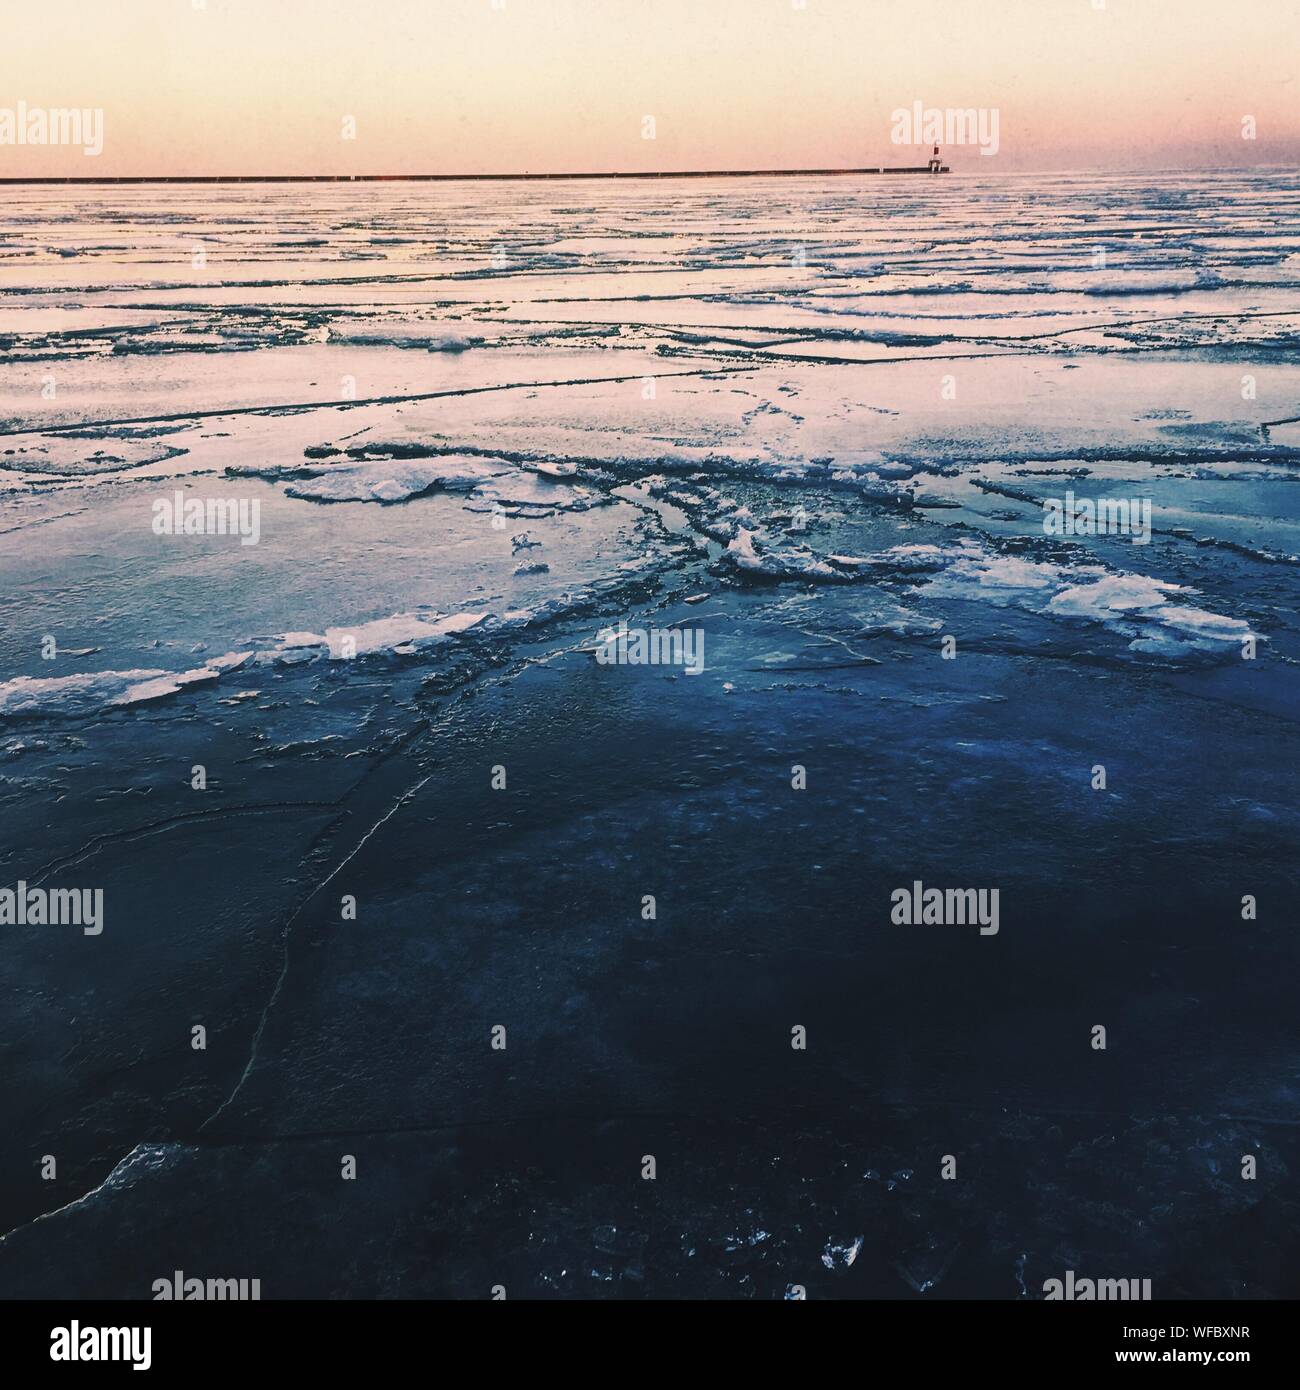 Scenic View Of Frozen Sea Against Sky During Sunset Stock Photo